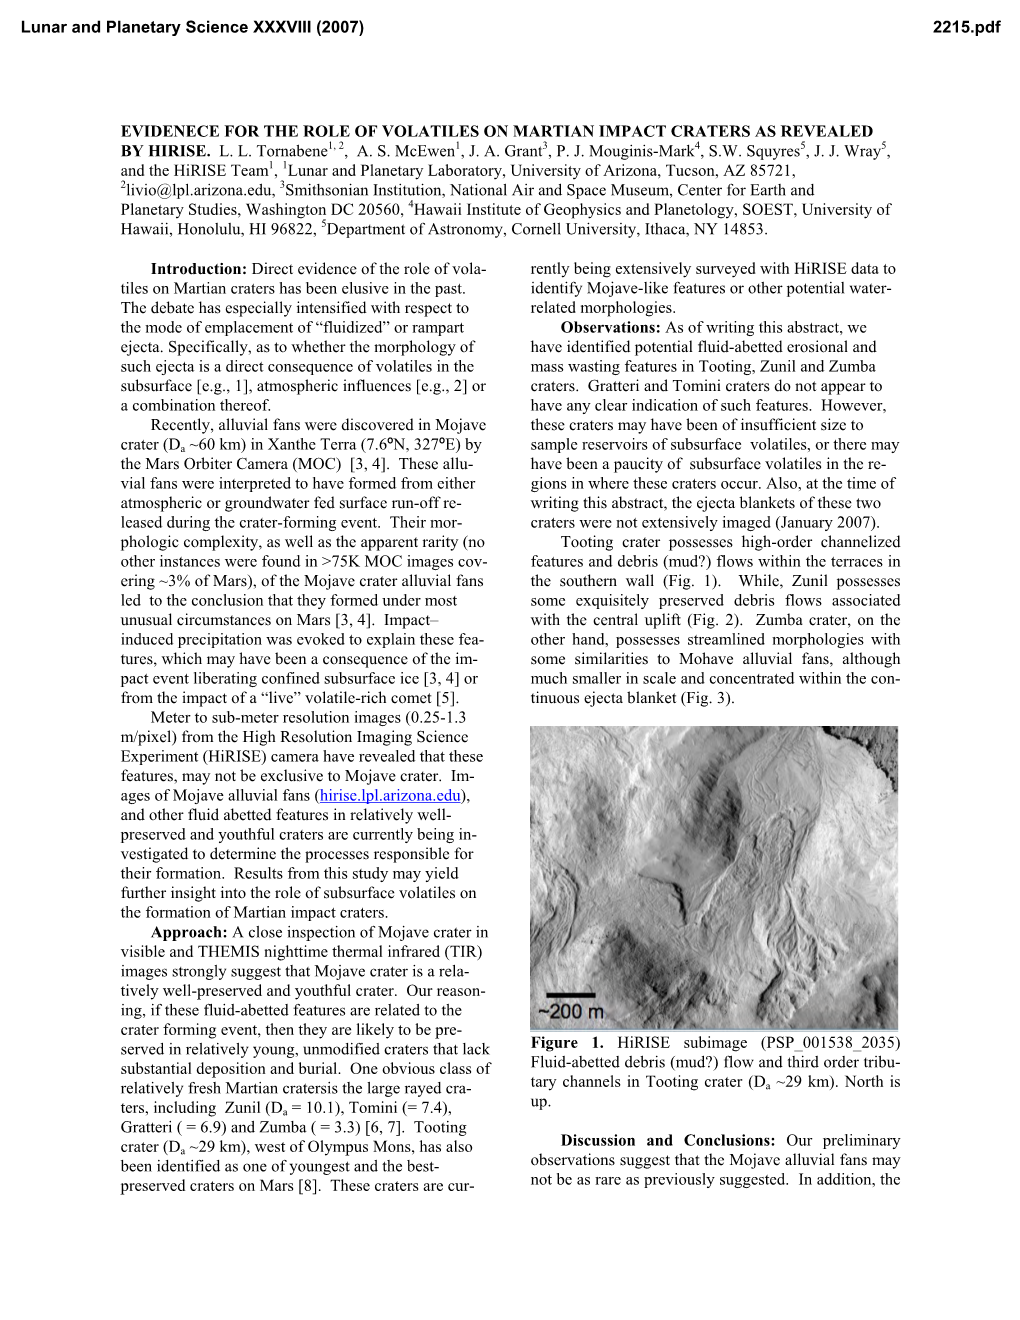 EVIDENECE for the ROLE of VOLATILES on MARTIAN IMPACT CRATERS AS REVEALED by HIRISE. L. L. Tornabene1, 2, A. S. Mcewen1, J. A. Grant3, P